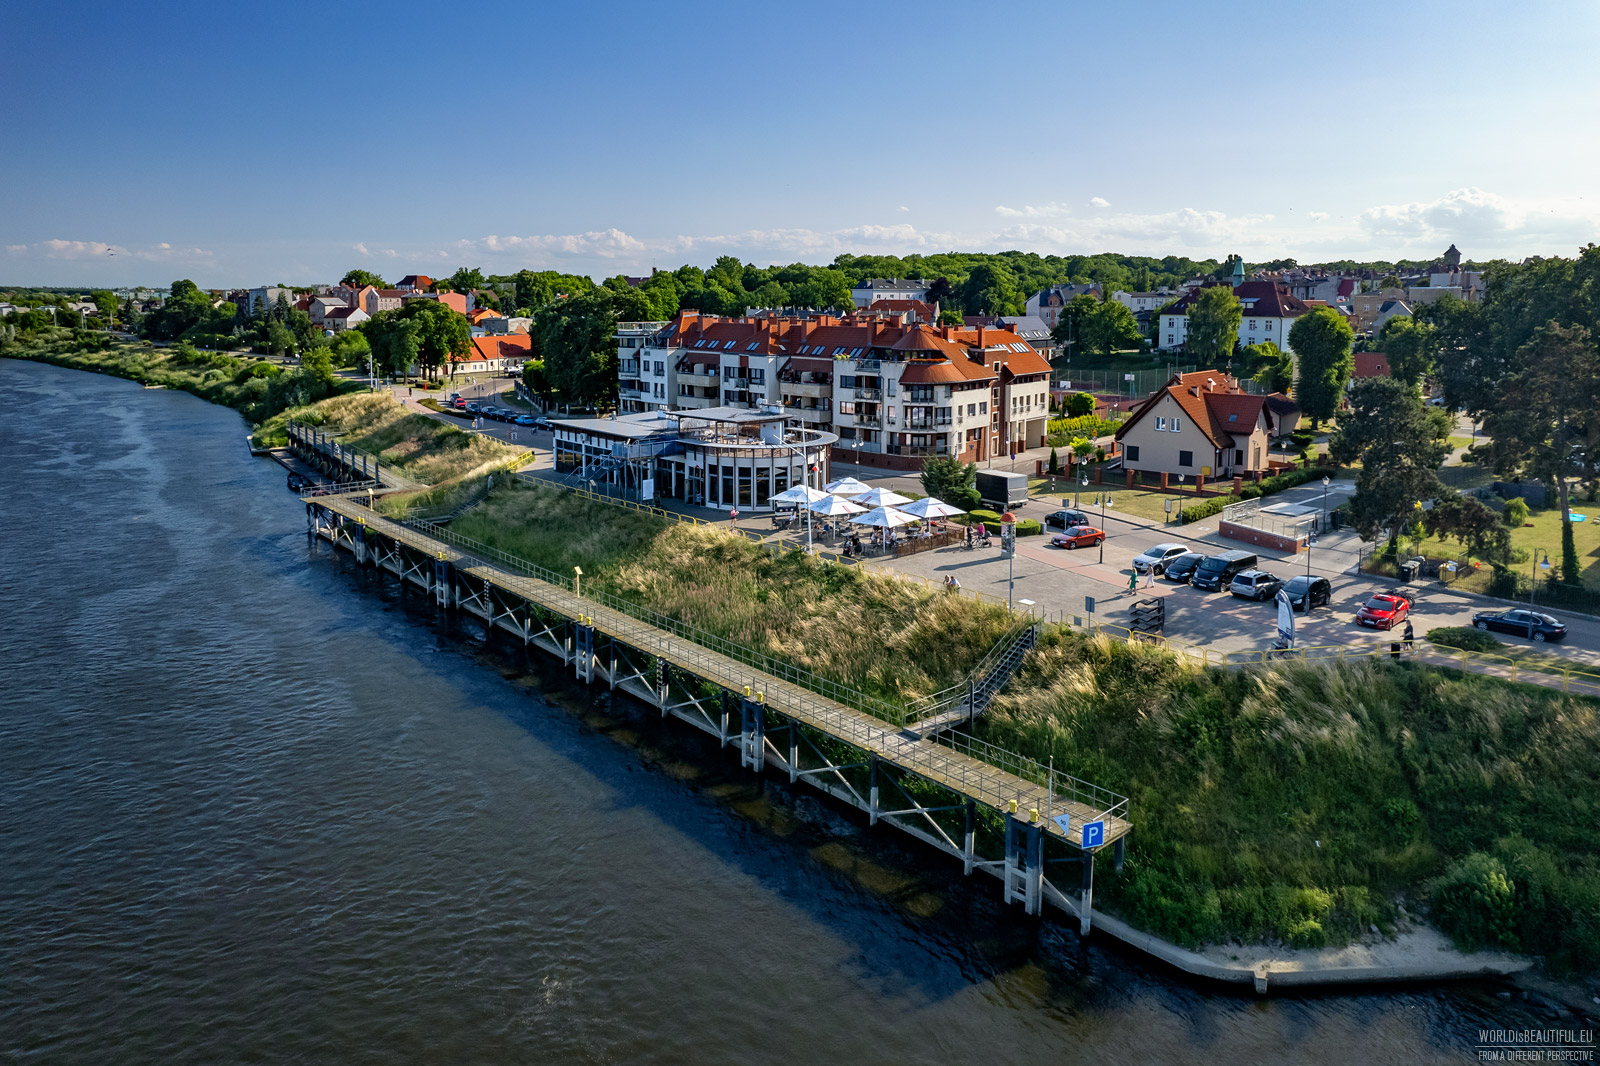 A marina for ships and yachts in Tczew